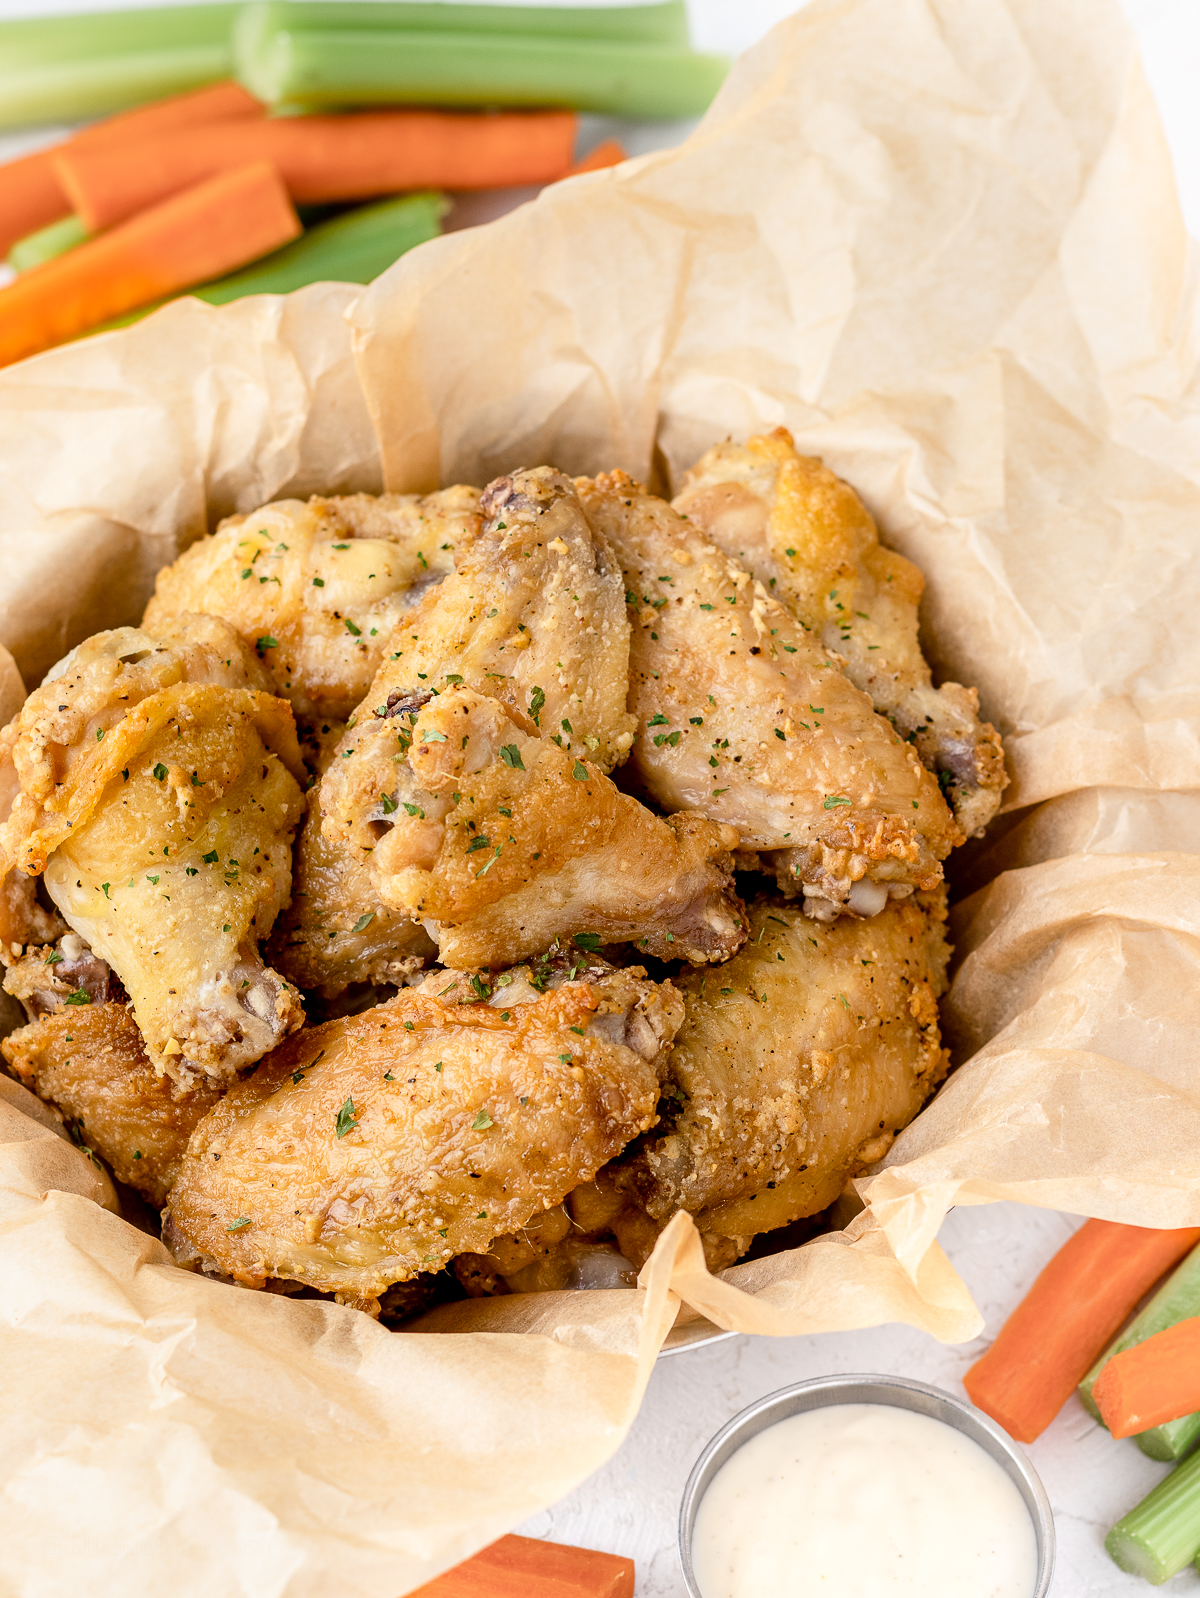 Oven Baked Chicken wings in a parchment lined basket. Surrounded by carrots, celery, and dipping sauce.